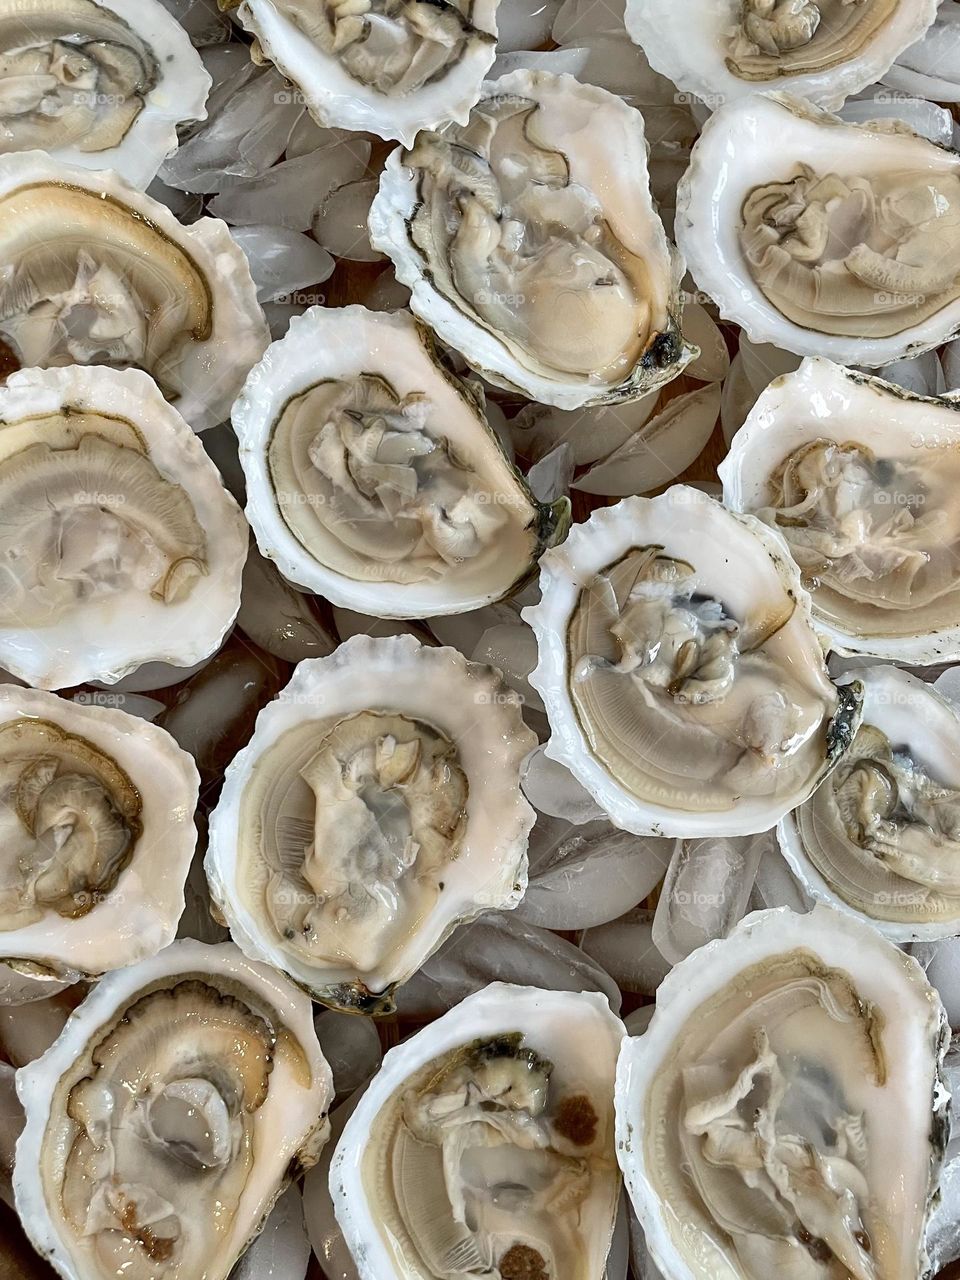 My comfort food. Maine Oysters for the win!